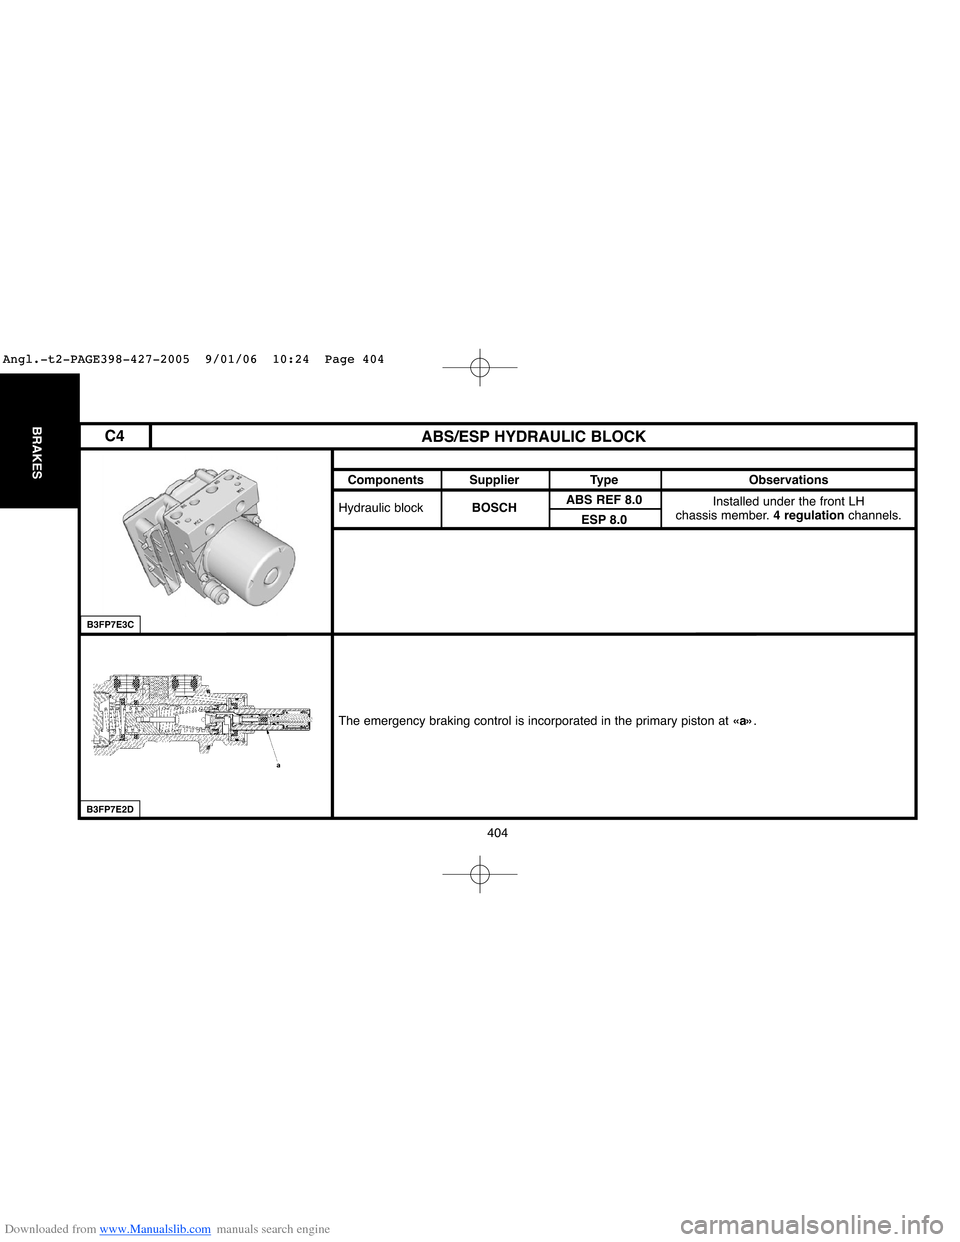 Citroen C4 2005 2.G Workshop Manual Downloaded from www.Manualslib.com manuals search engine 404
BRAKES
B3FP7E2D
ABS/ESP HYDRAULIC BLOCK
Components Supplier Type Observations
Hydraulic blockBOSCHABS REF 8.0
Installed under the front LH 